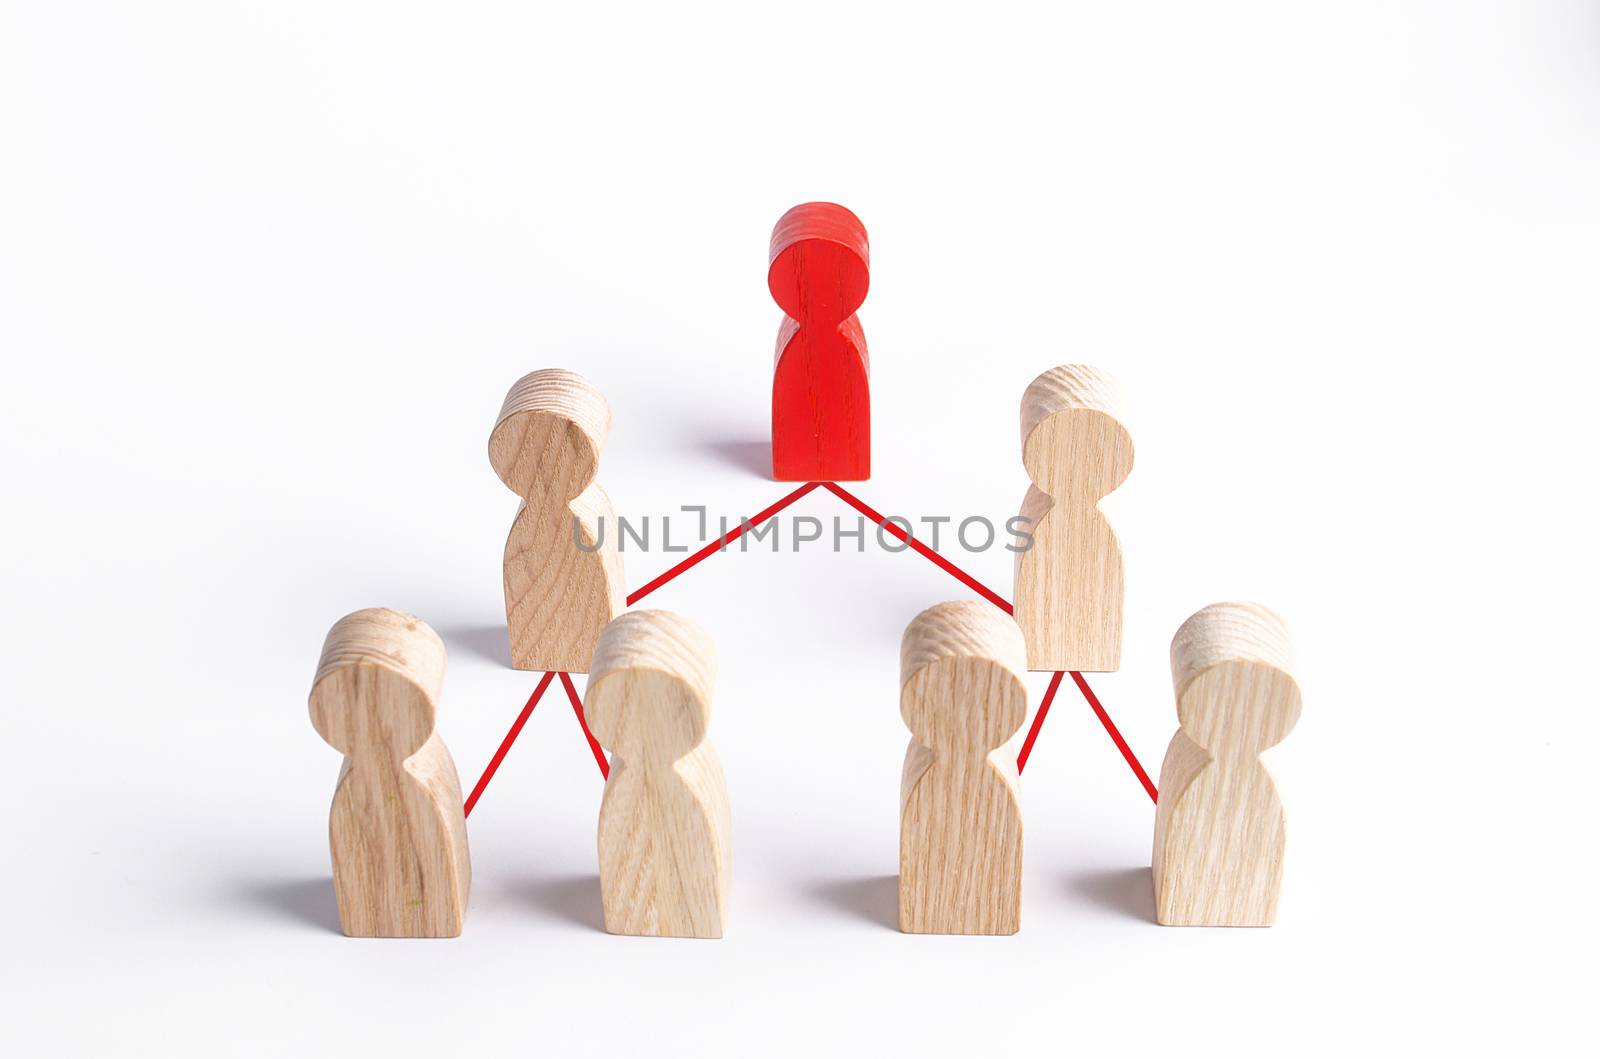 A hierarchical system within a company or organization. Leadership, teamwork, feedback in the team. Cooperation, collaboration. Hierarchy in the company. Business management and giving orders to staff by iLixe48